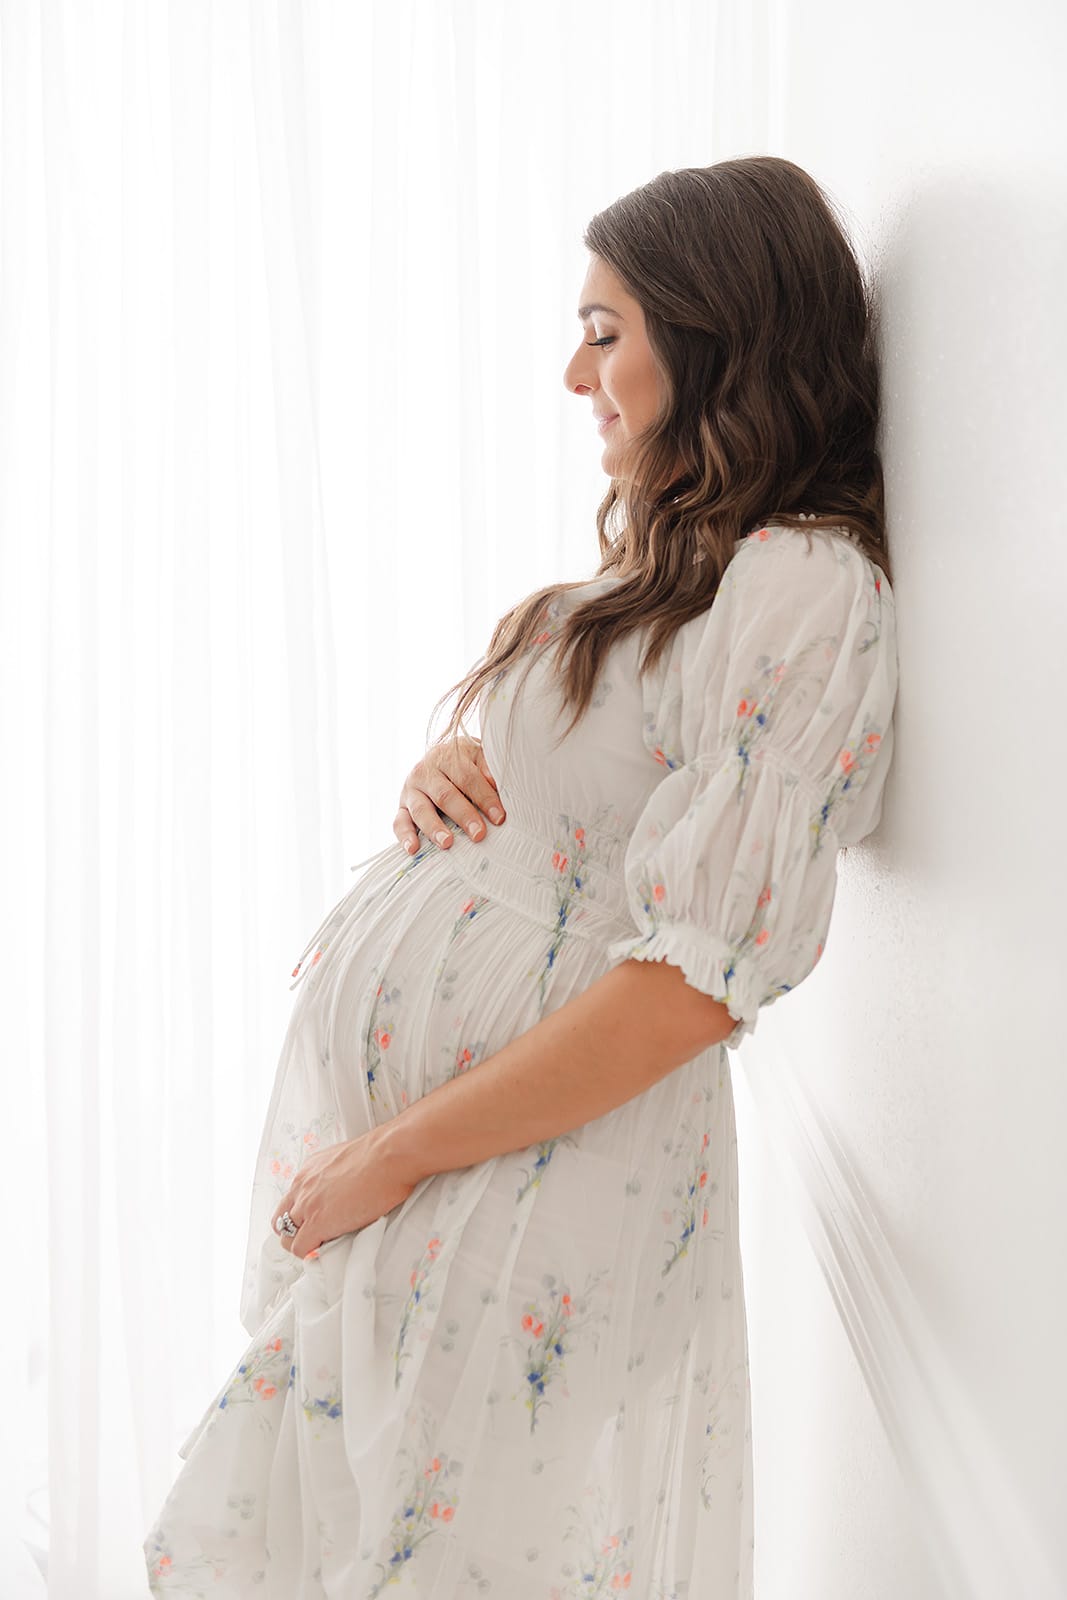 A Pensacola maternity photographer captures a pregnant woman in a floral dress leaning against a wall.